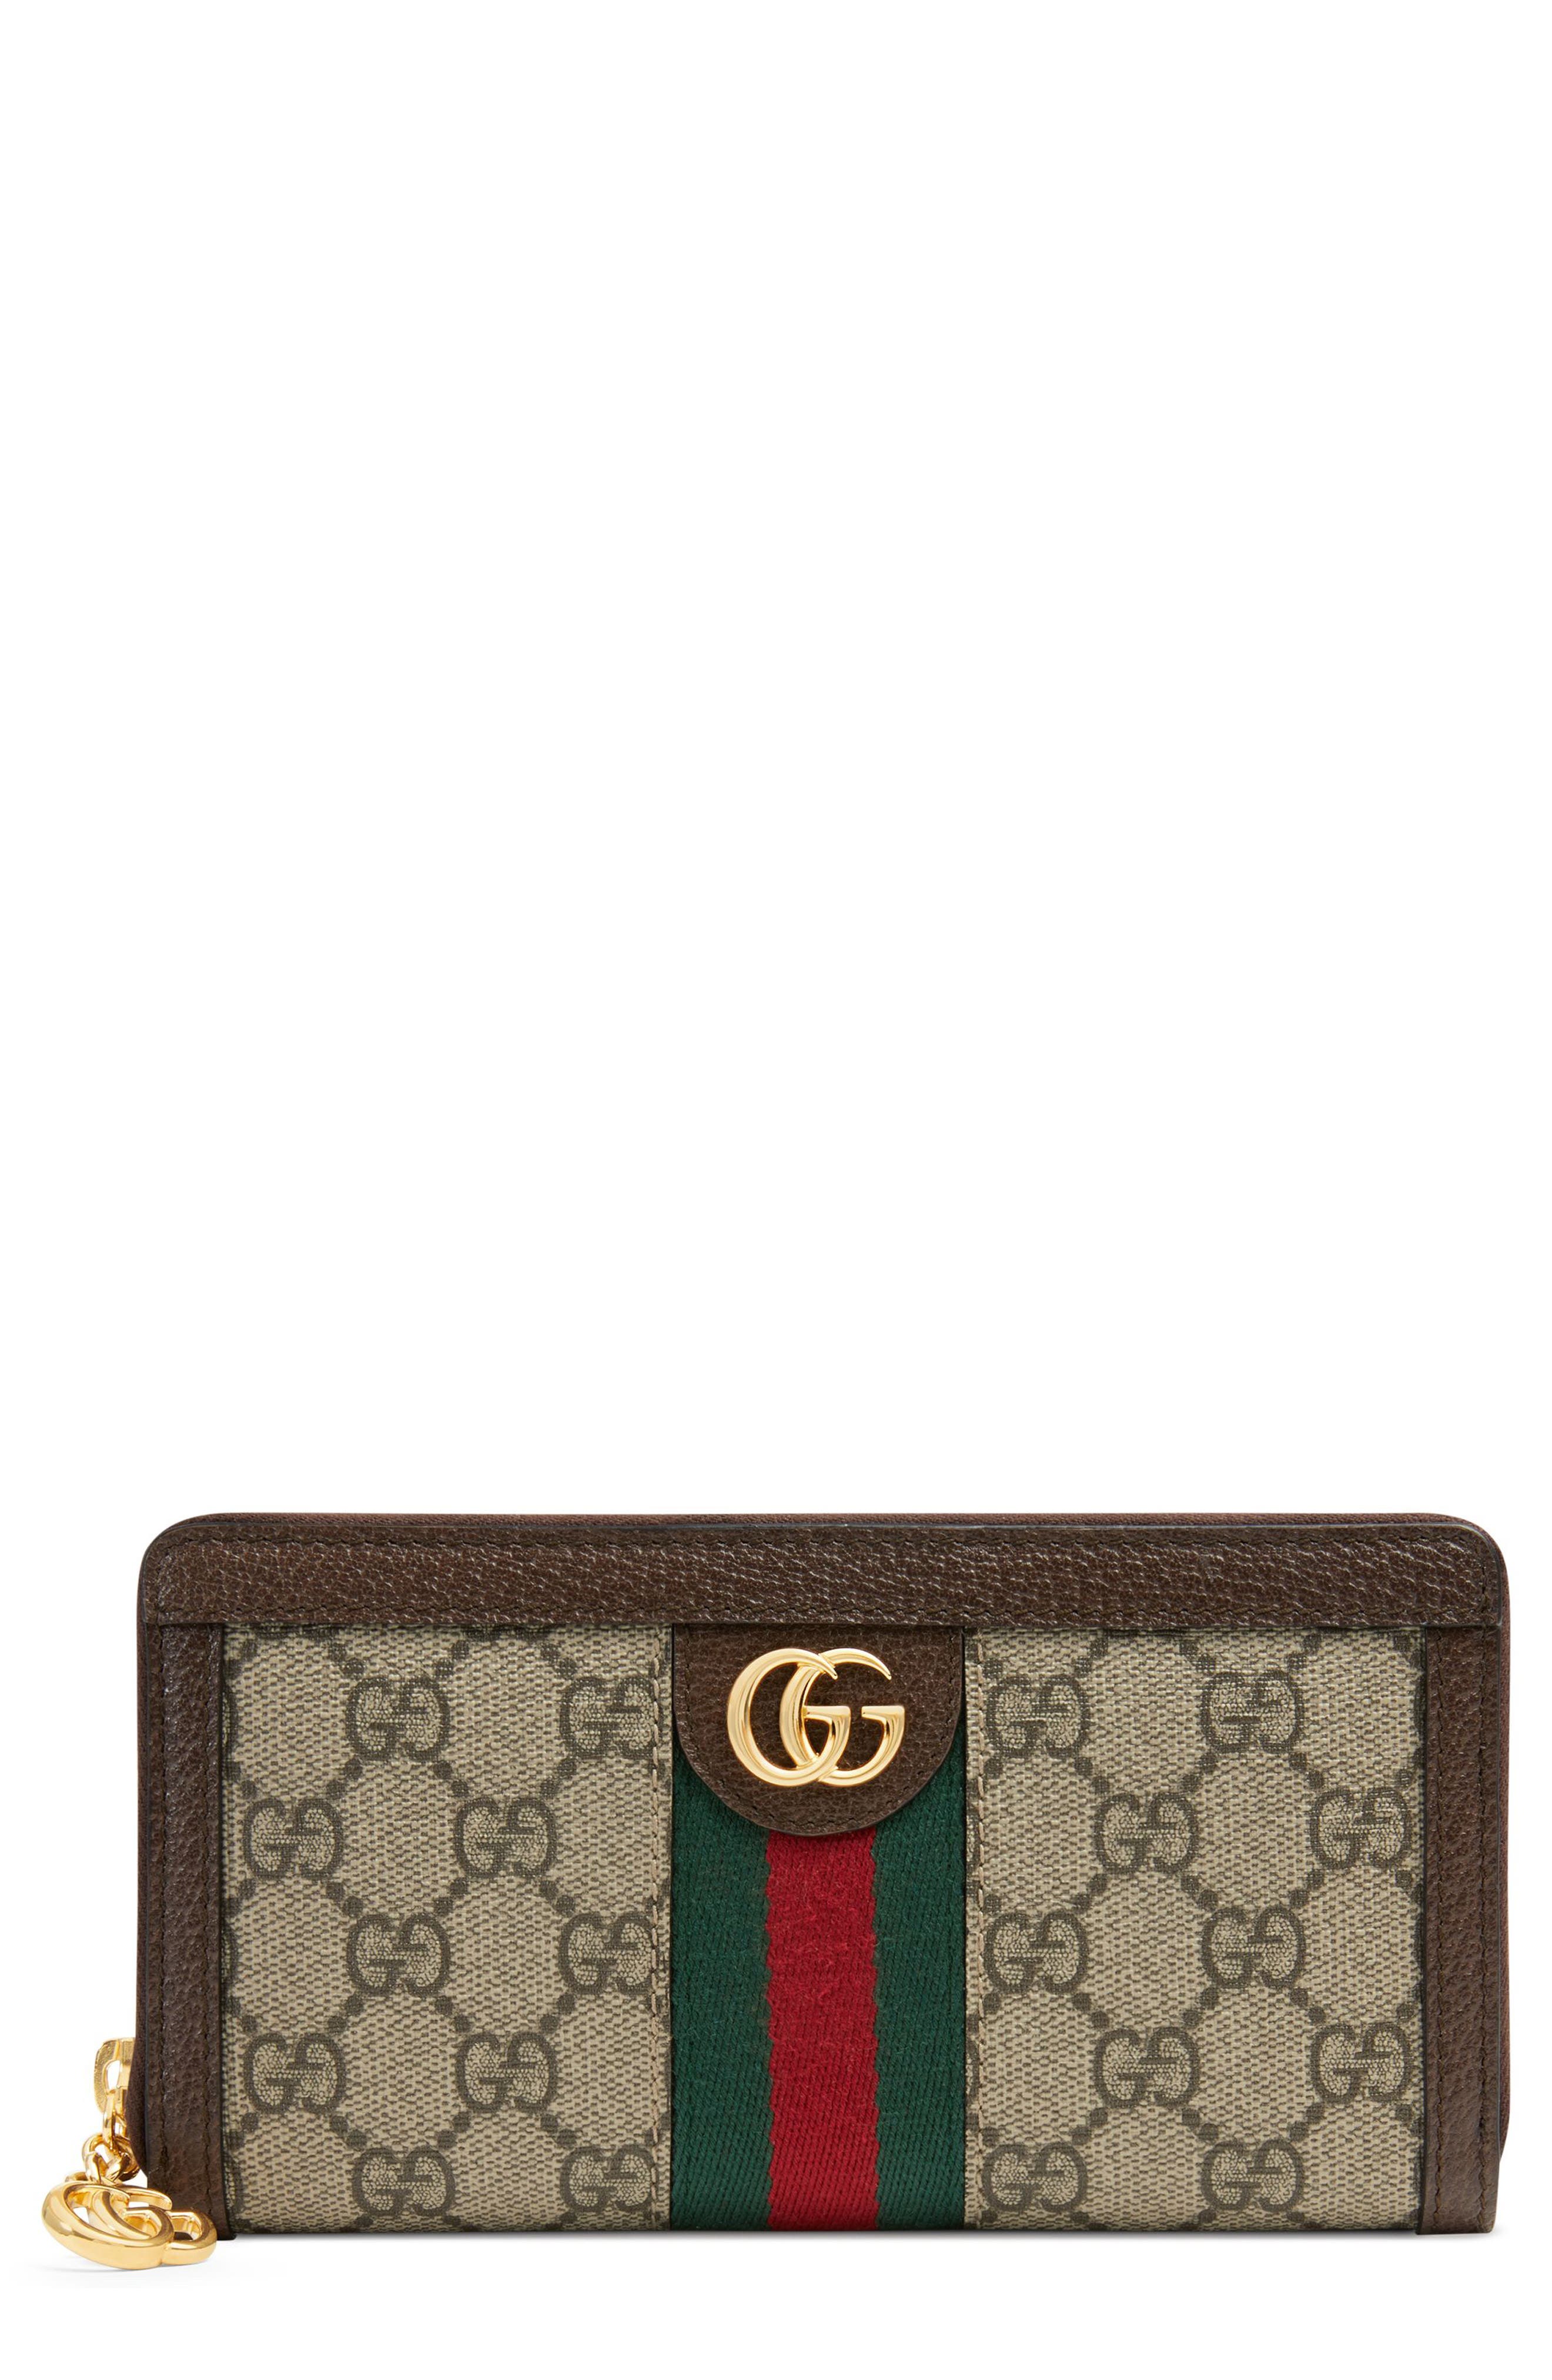 gucci wallet with zipper